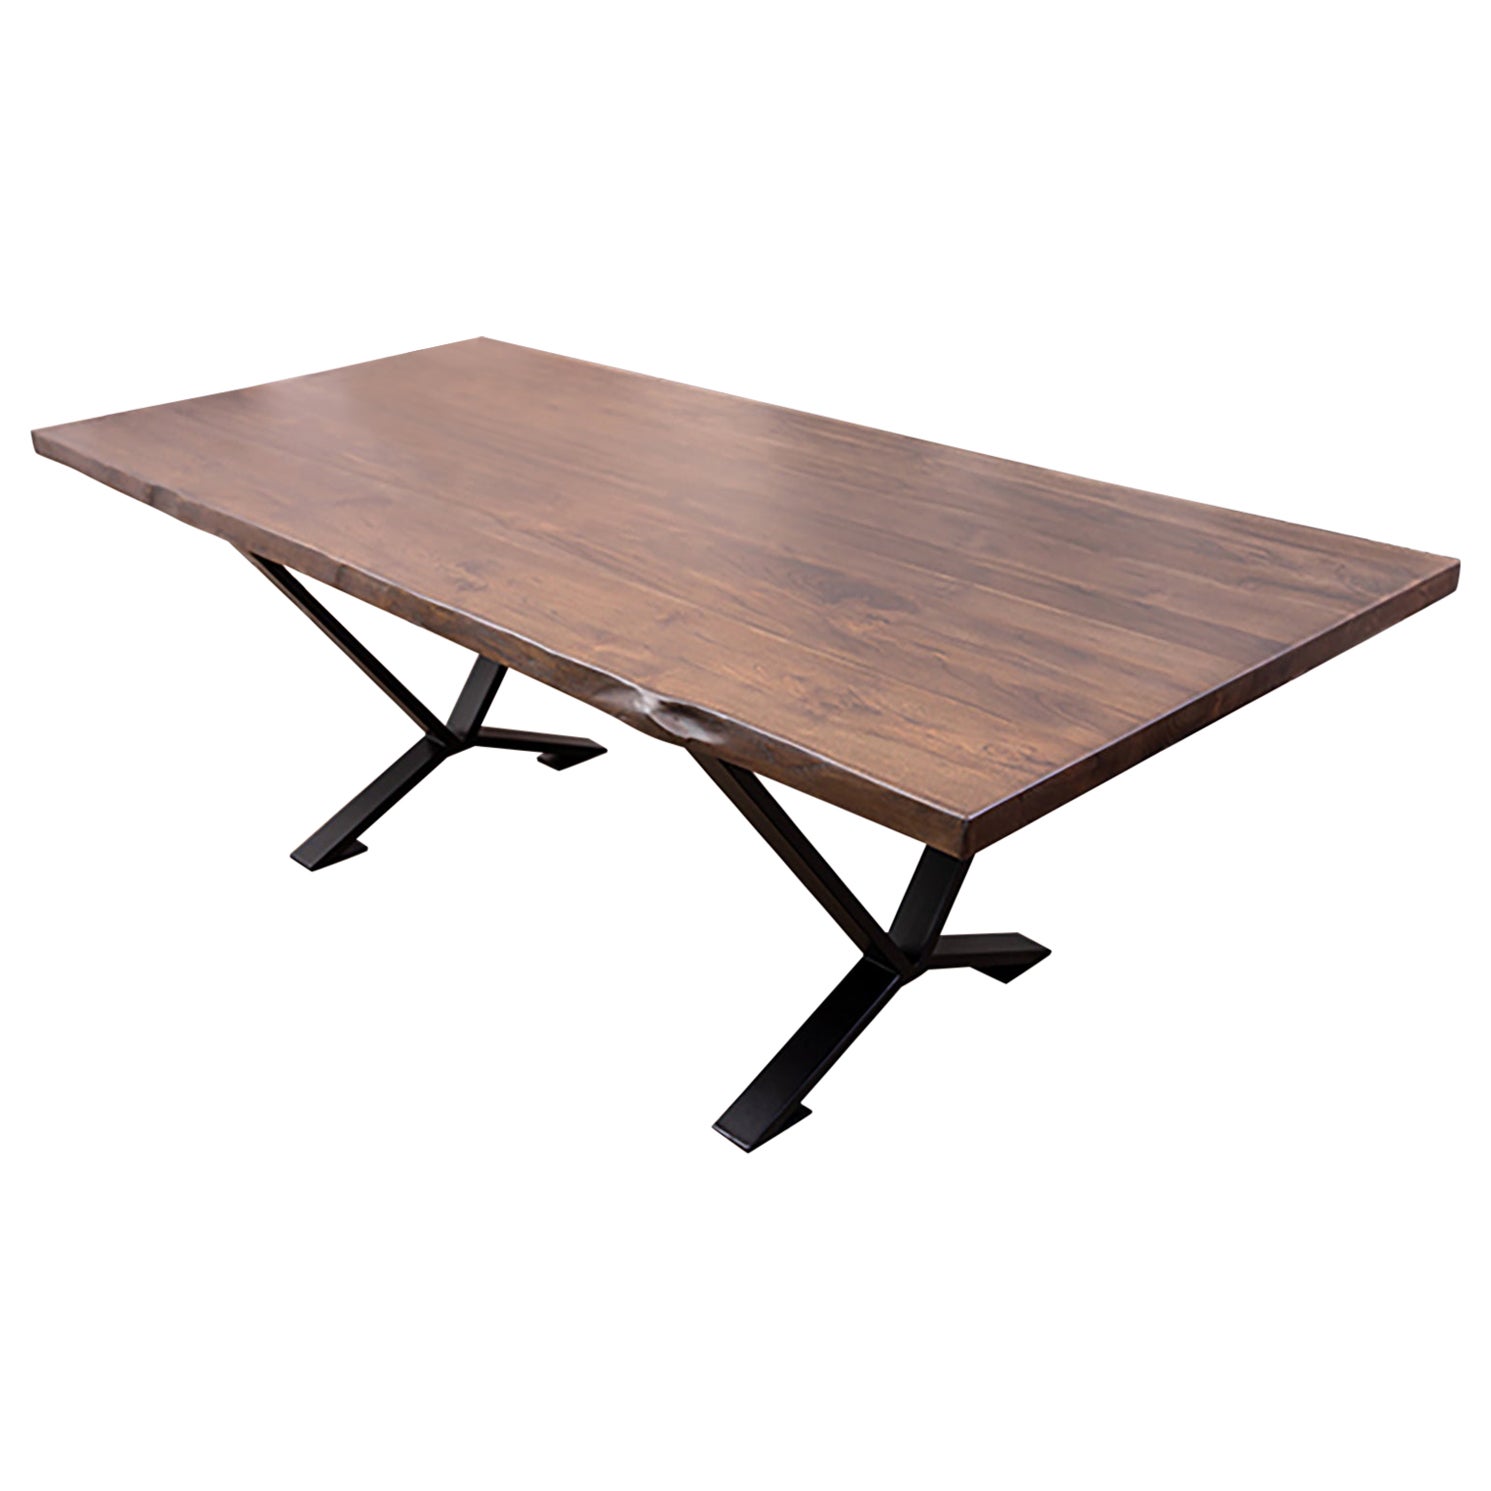 100% Solid Teak Live Edge Dining Table in Cocoa For Sale